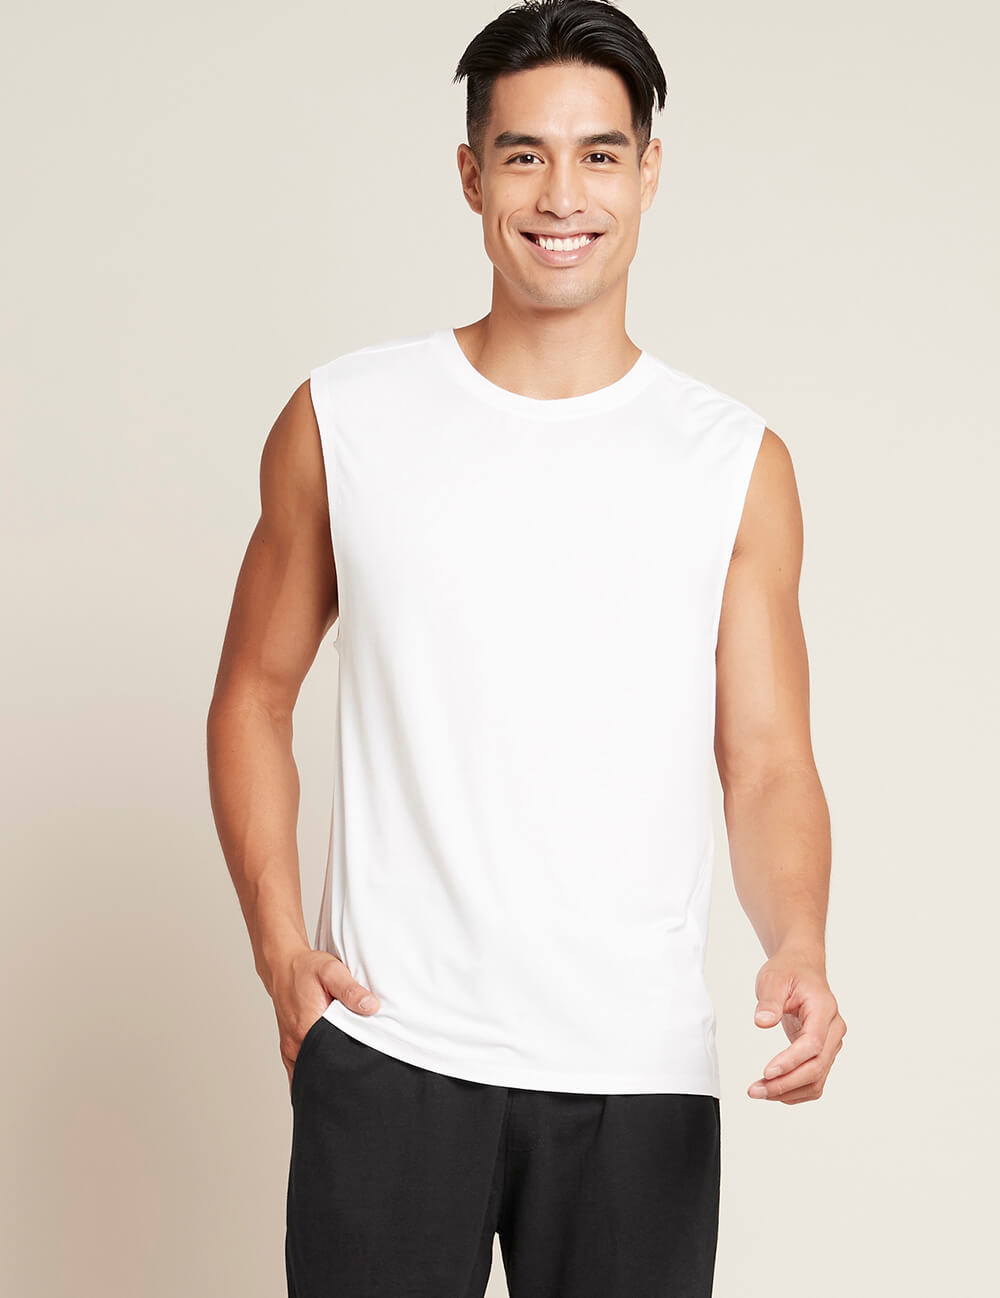 Mens-Active-Muscle-Tee-White-Front-1_1992e2e6-51c8-4f61-80a2-56986ce85242.jpg